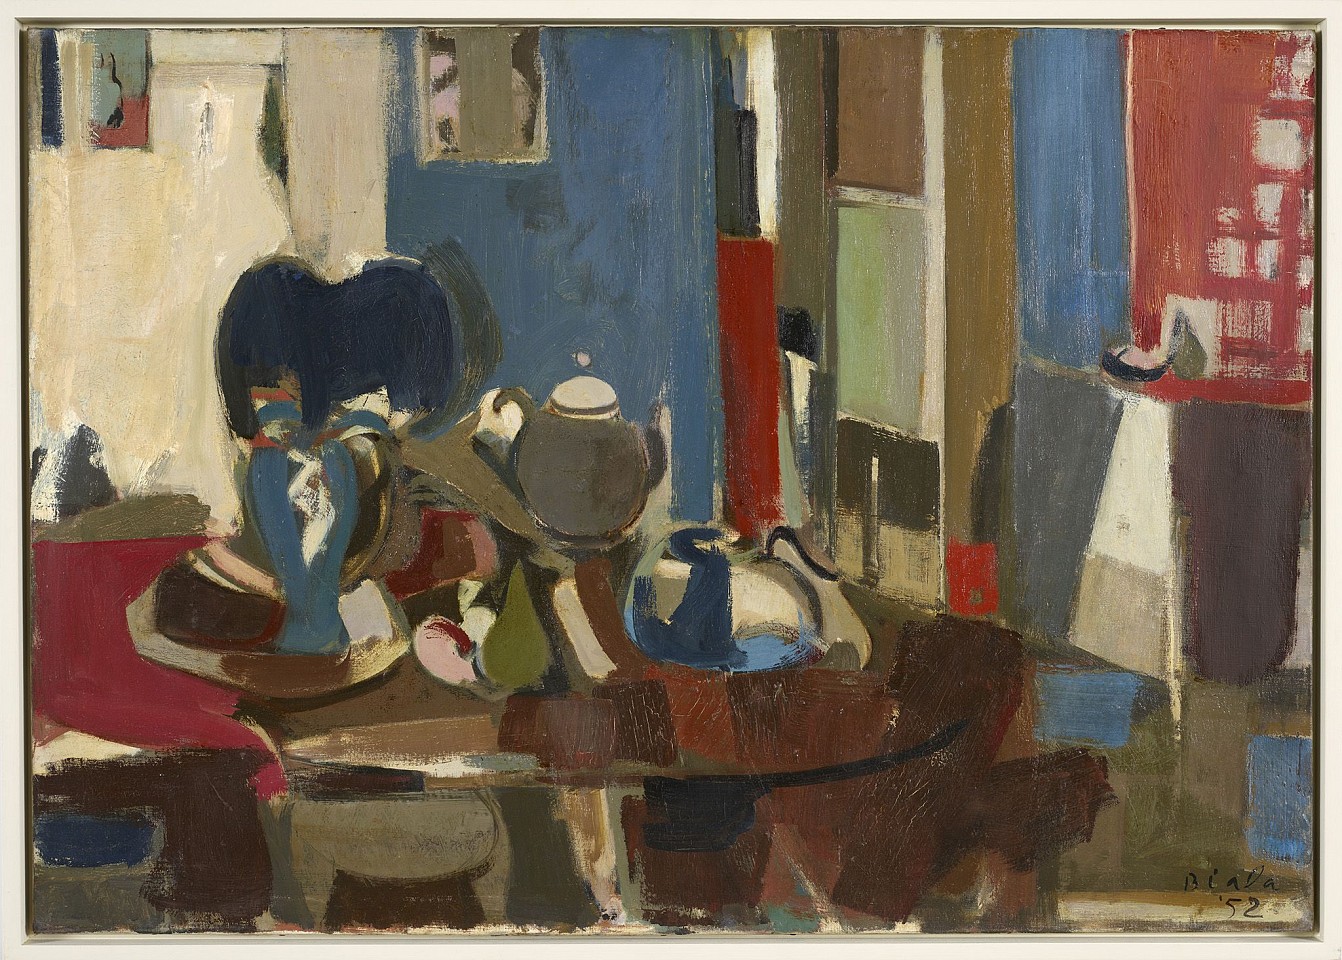 Janice Biala, Untitled (Blue Interior with Kettle), 1952
Oil on canvas, 25 1/2 x 36 1/4 in. (64.8 x 92.1 cm)
BIAL-00024